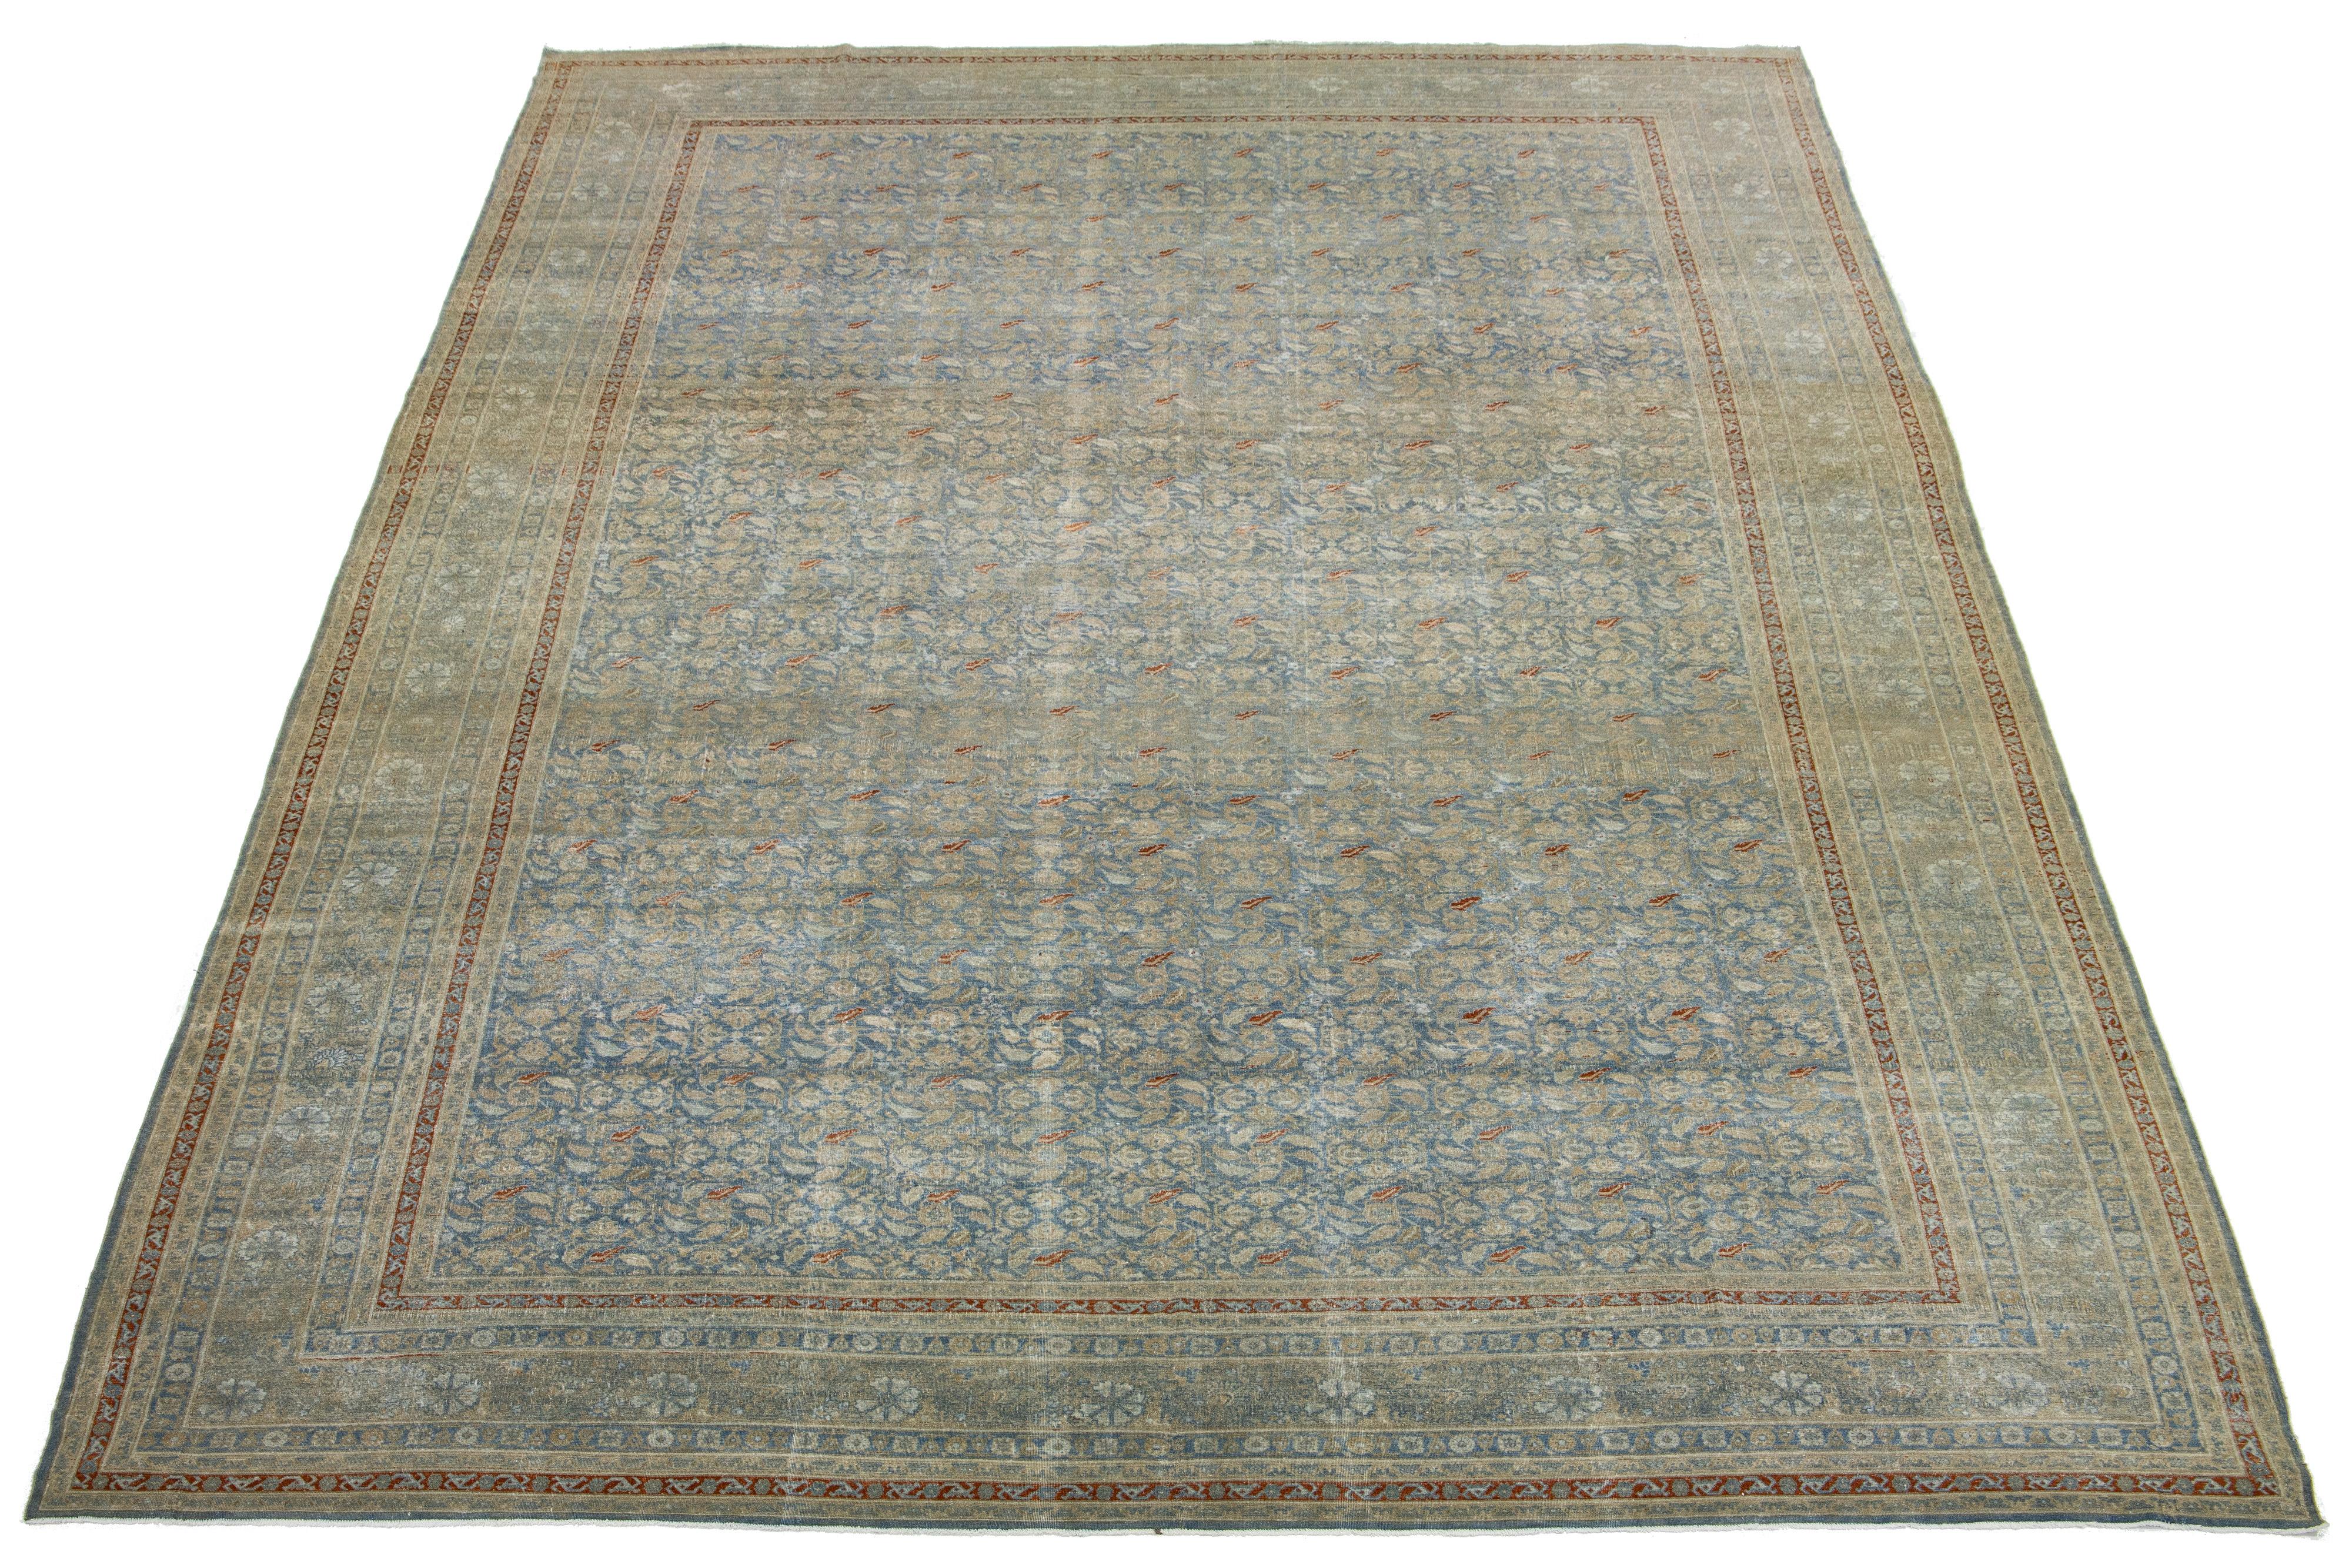 This Persian Tabriz wool rug is handcrafted and features a classic all-over floral pattern on a blue background with shades of orange and light brown.

This rug measures  13'4